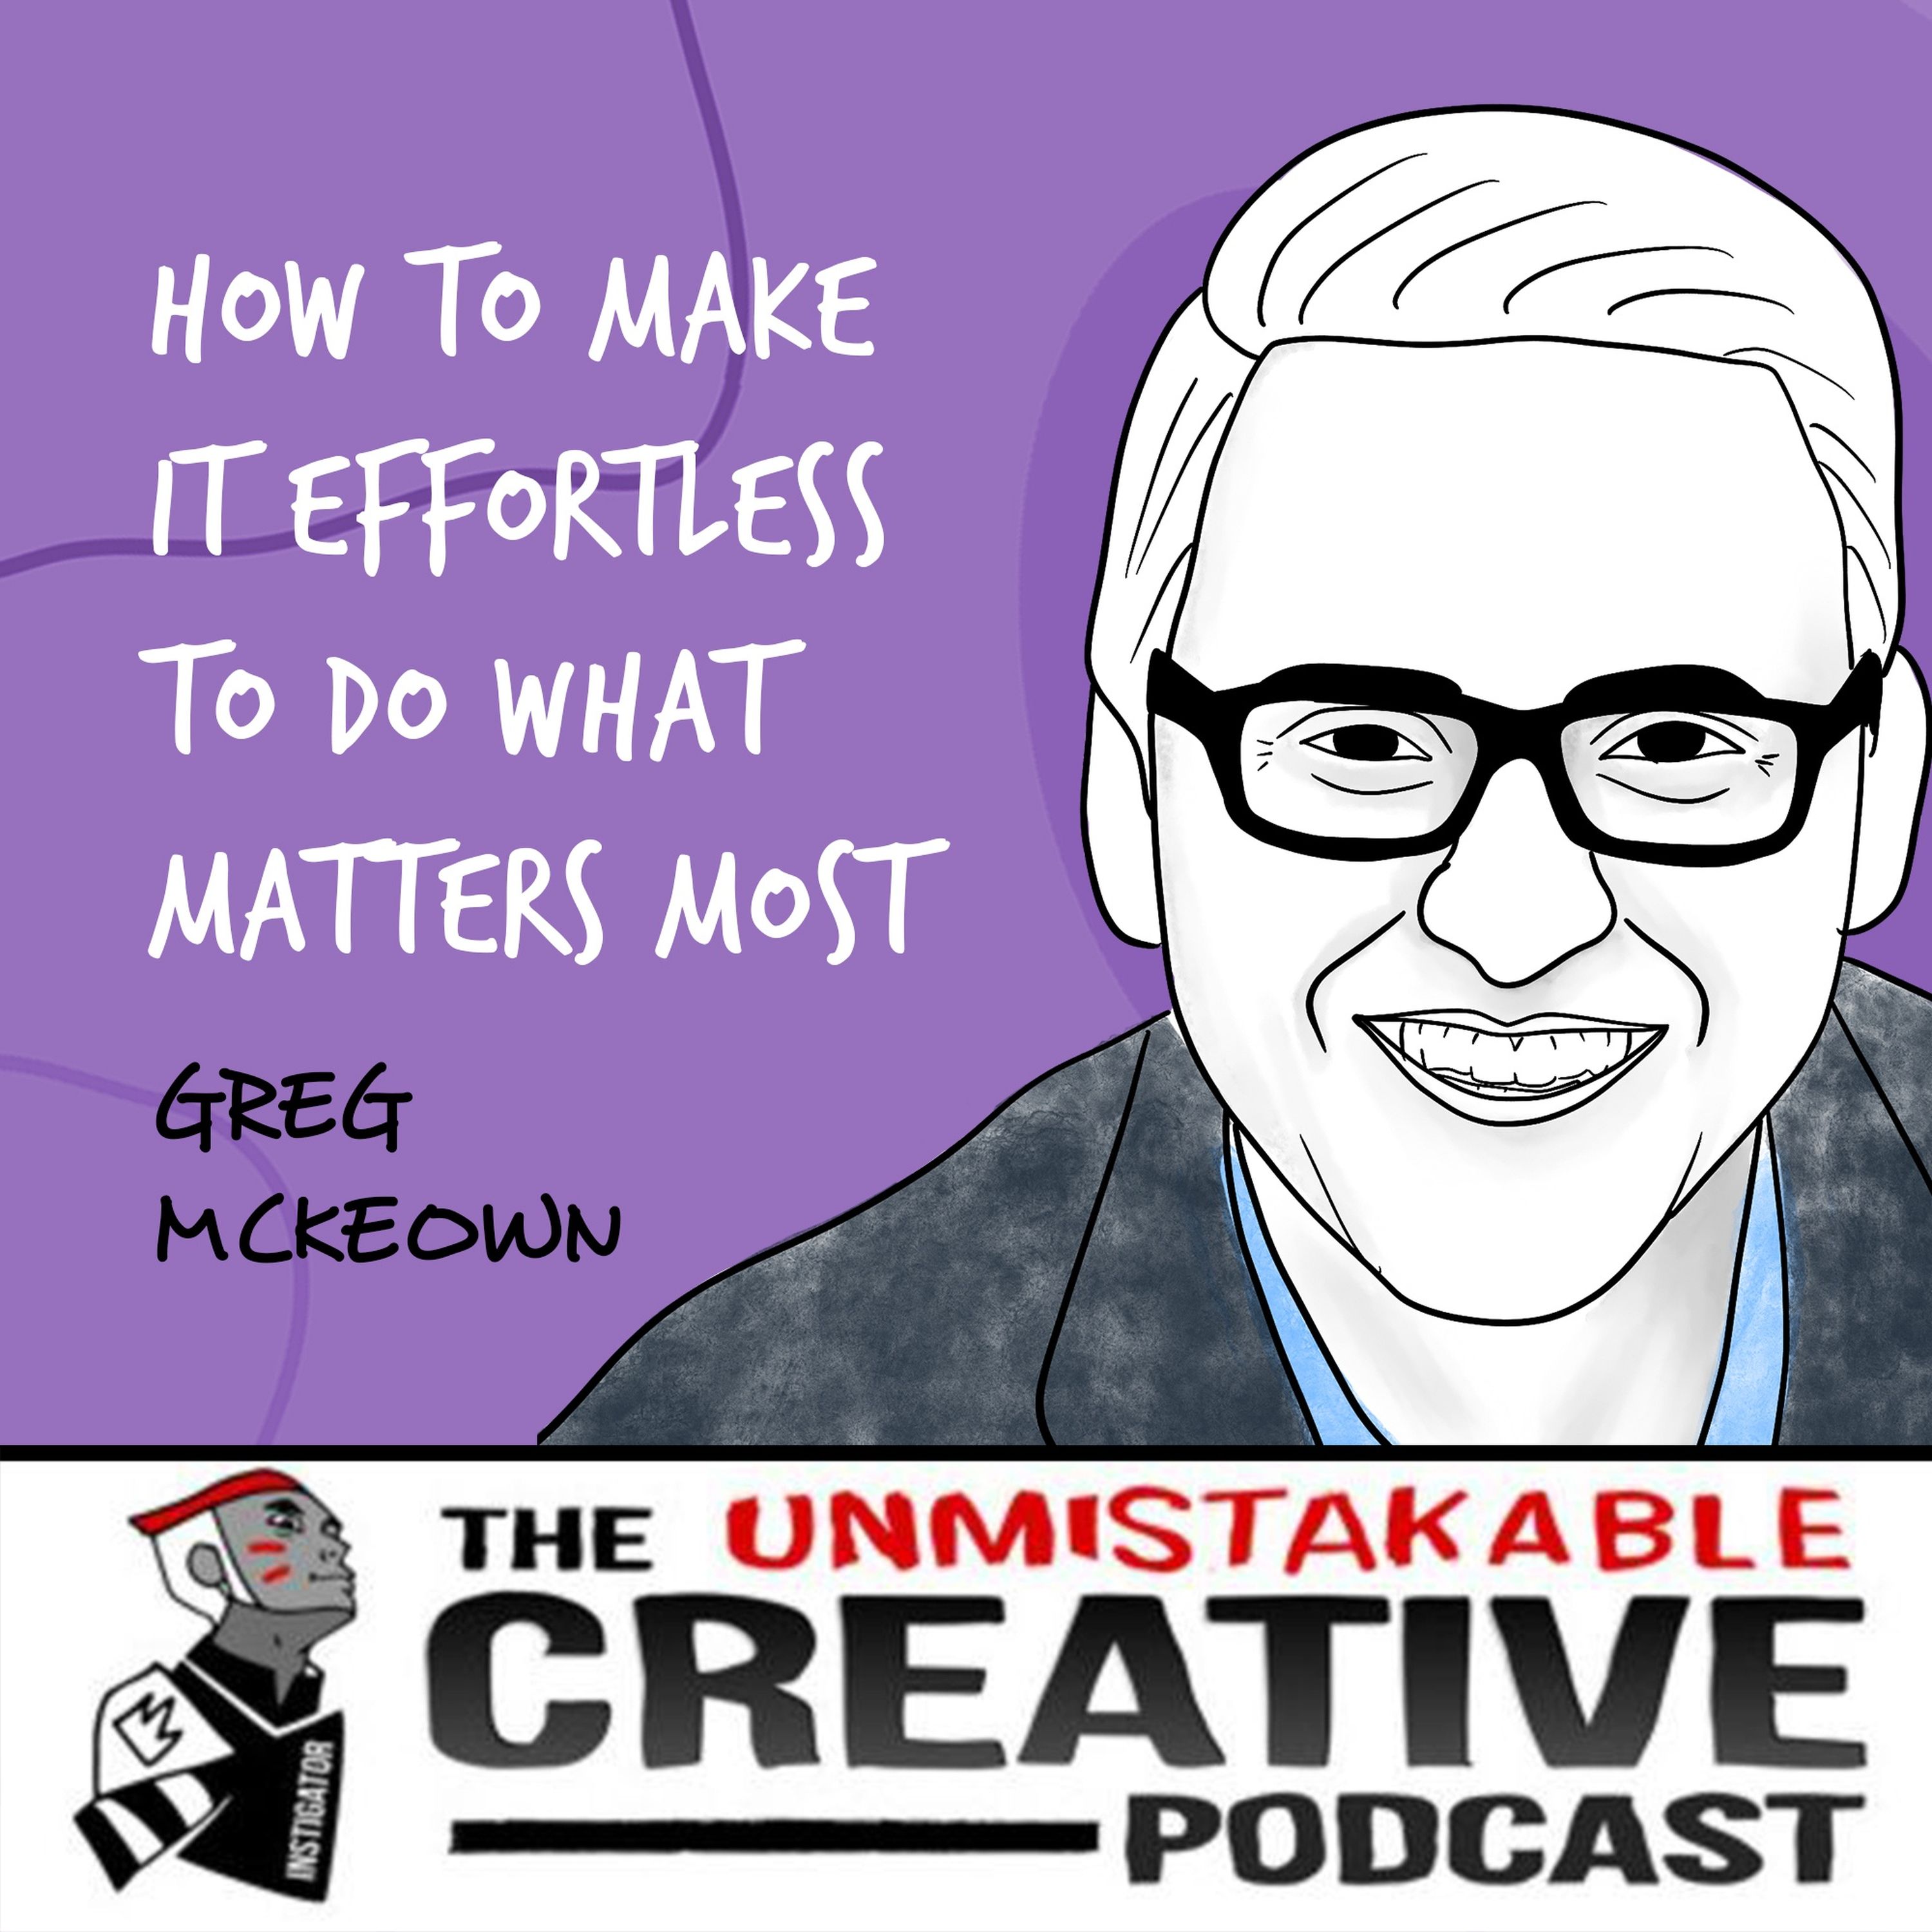 Greg McKeown | How to Make it Effortless to do What Matters Most Image